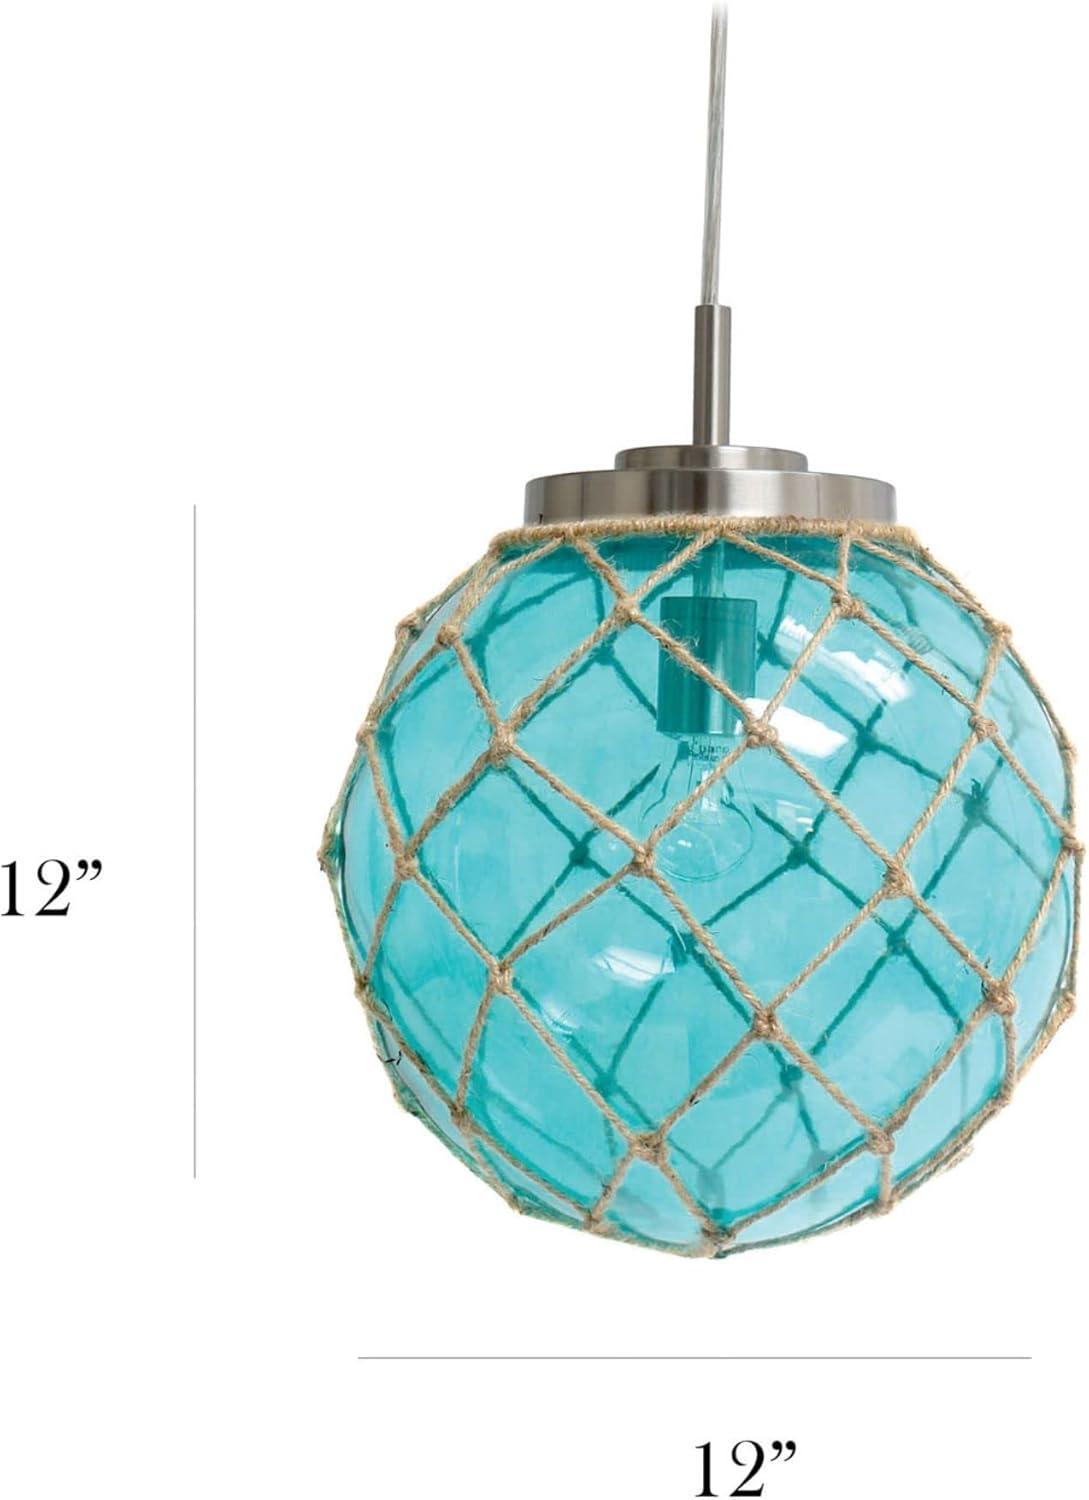 Aqua Sea Glass Globe Pendant with Brushed Nickel & Natural Rope Accent